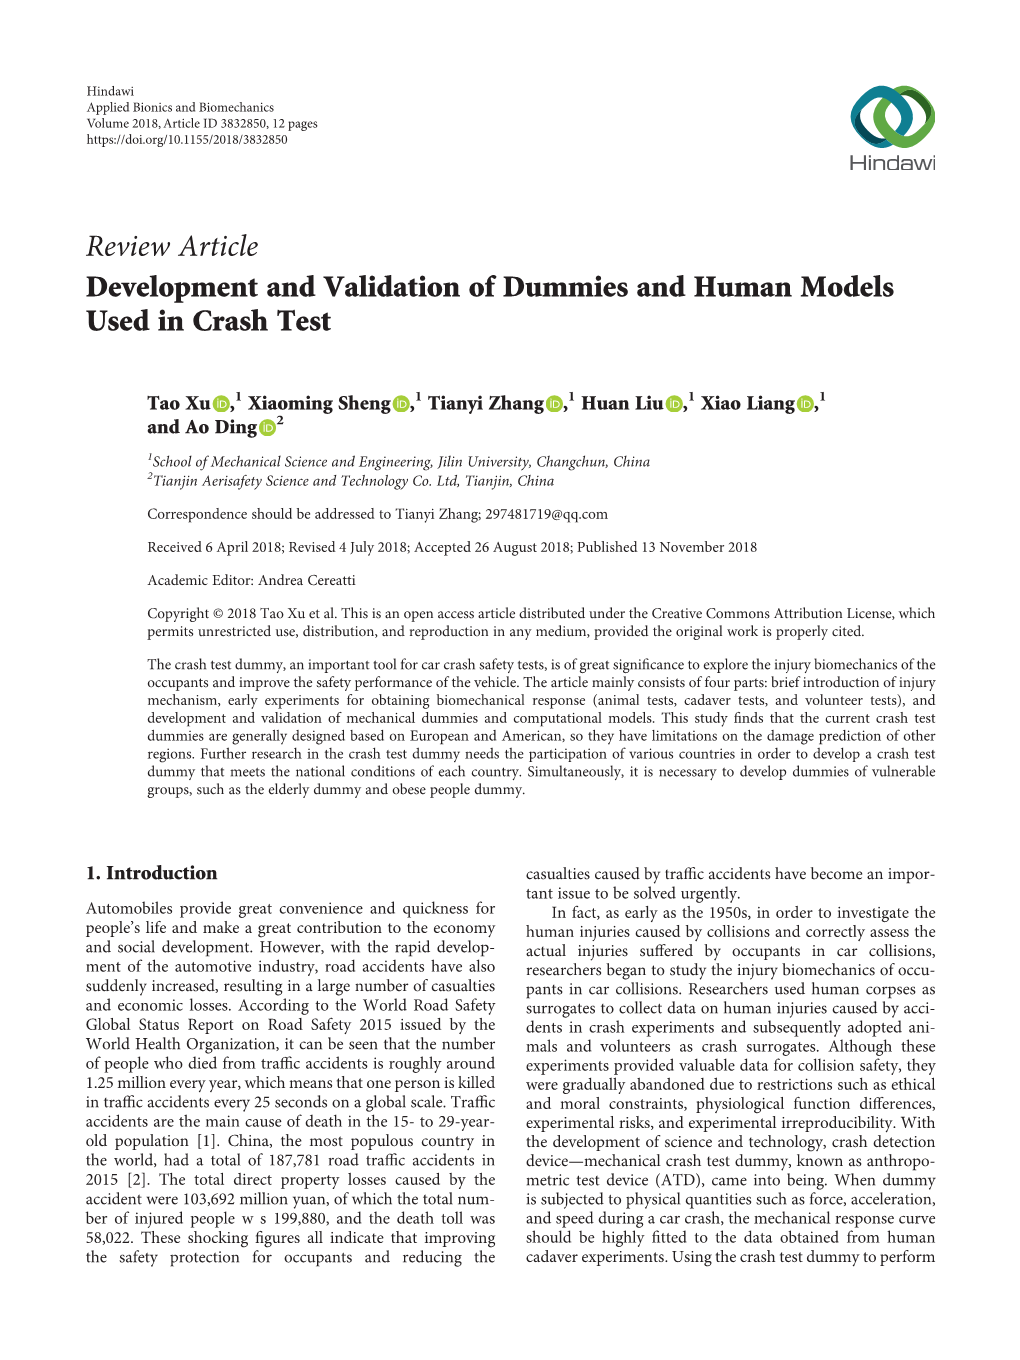 Development and Validation of Dummies and Human Models Used in Crash Test